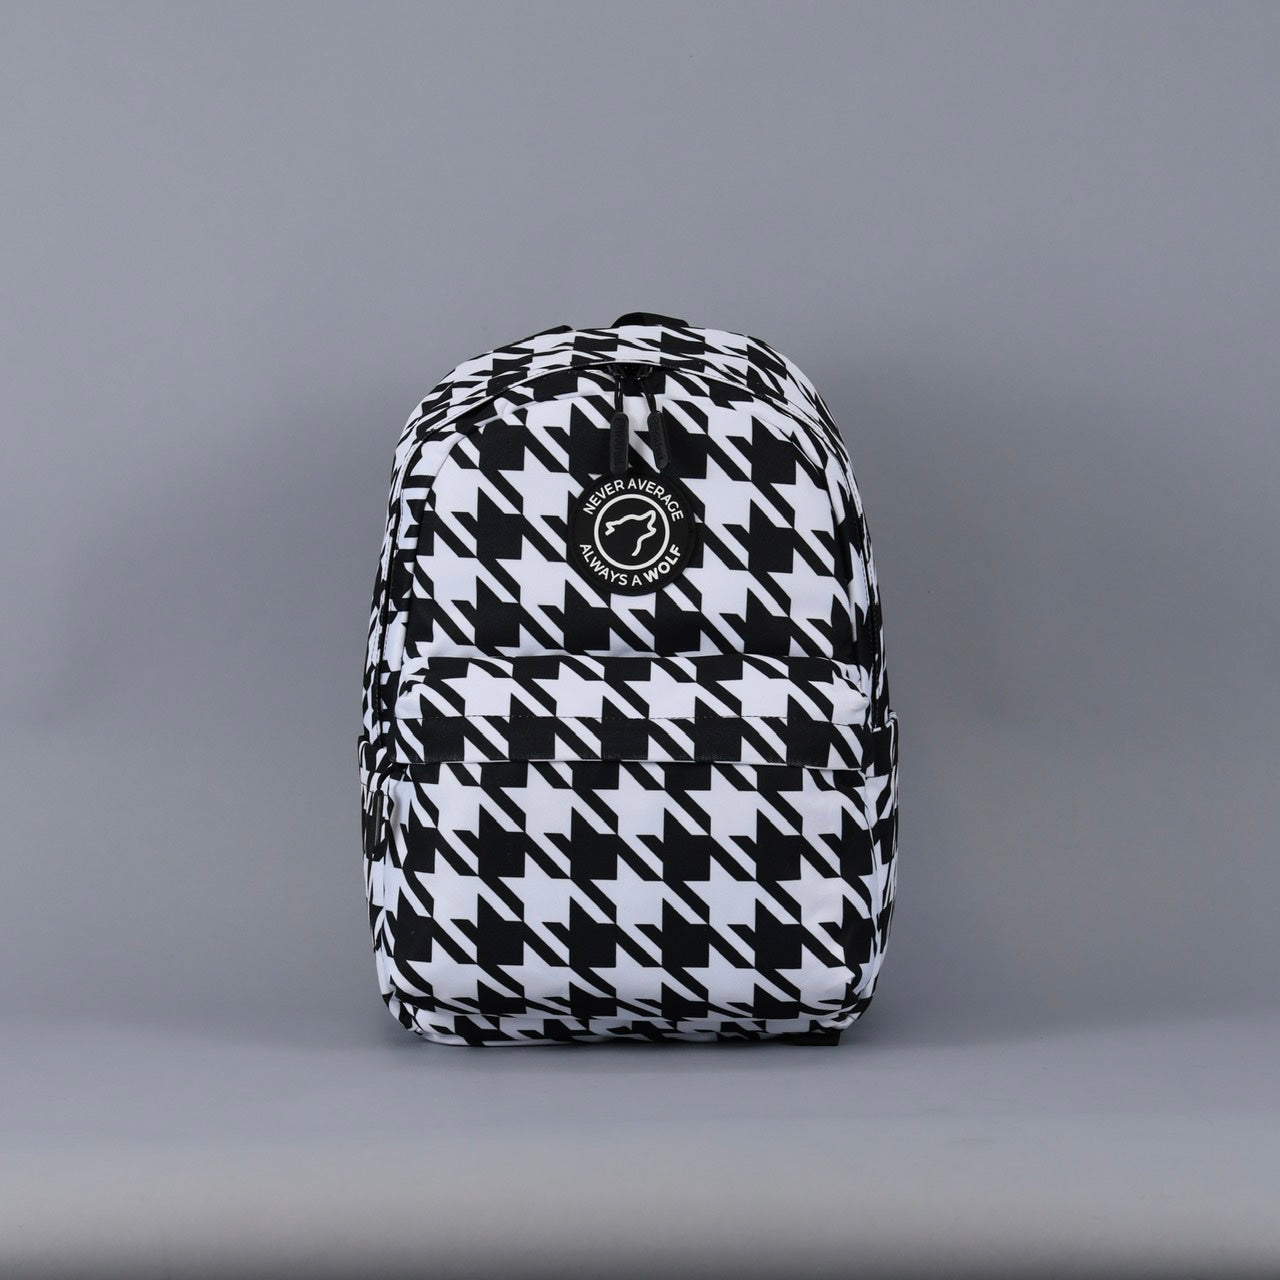 Houndstooth Classic Backpack